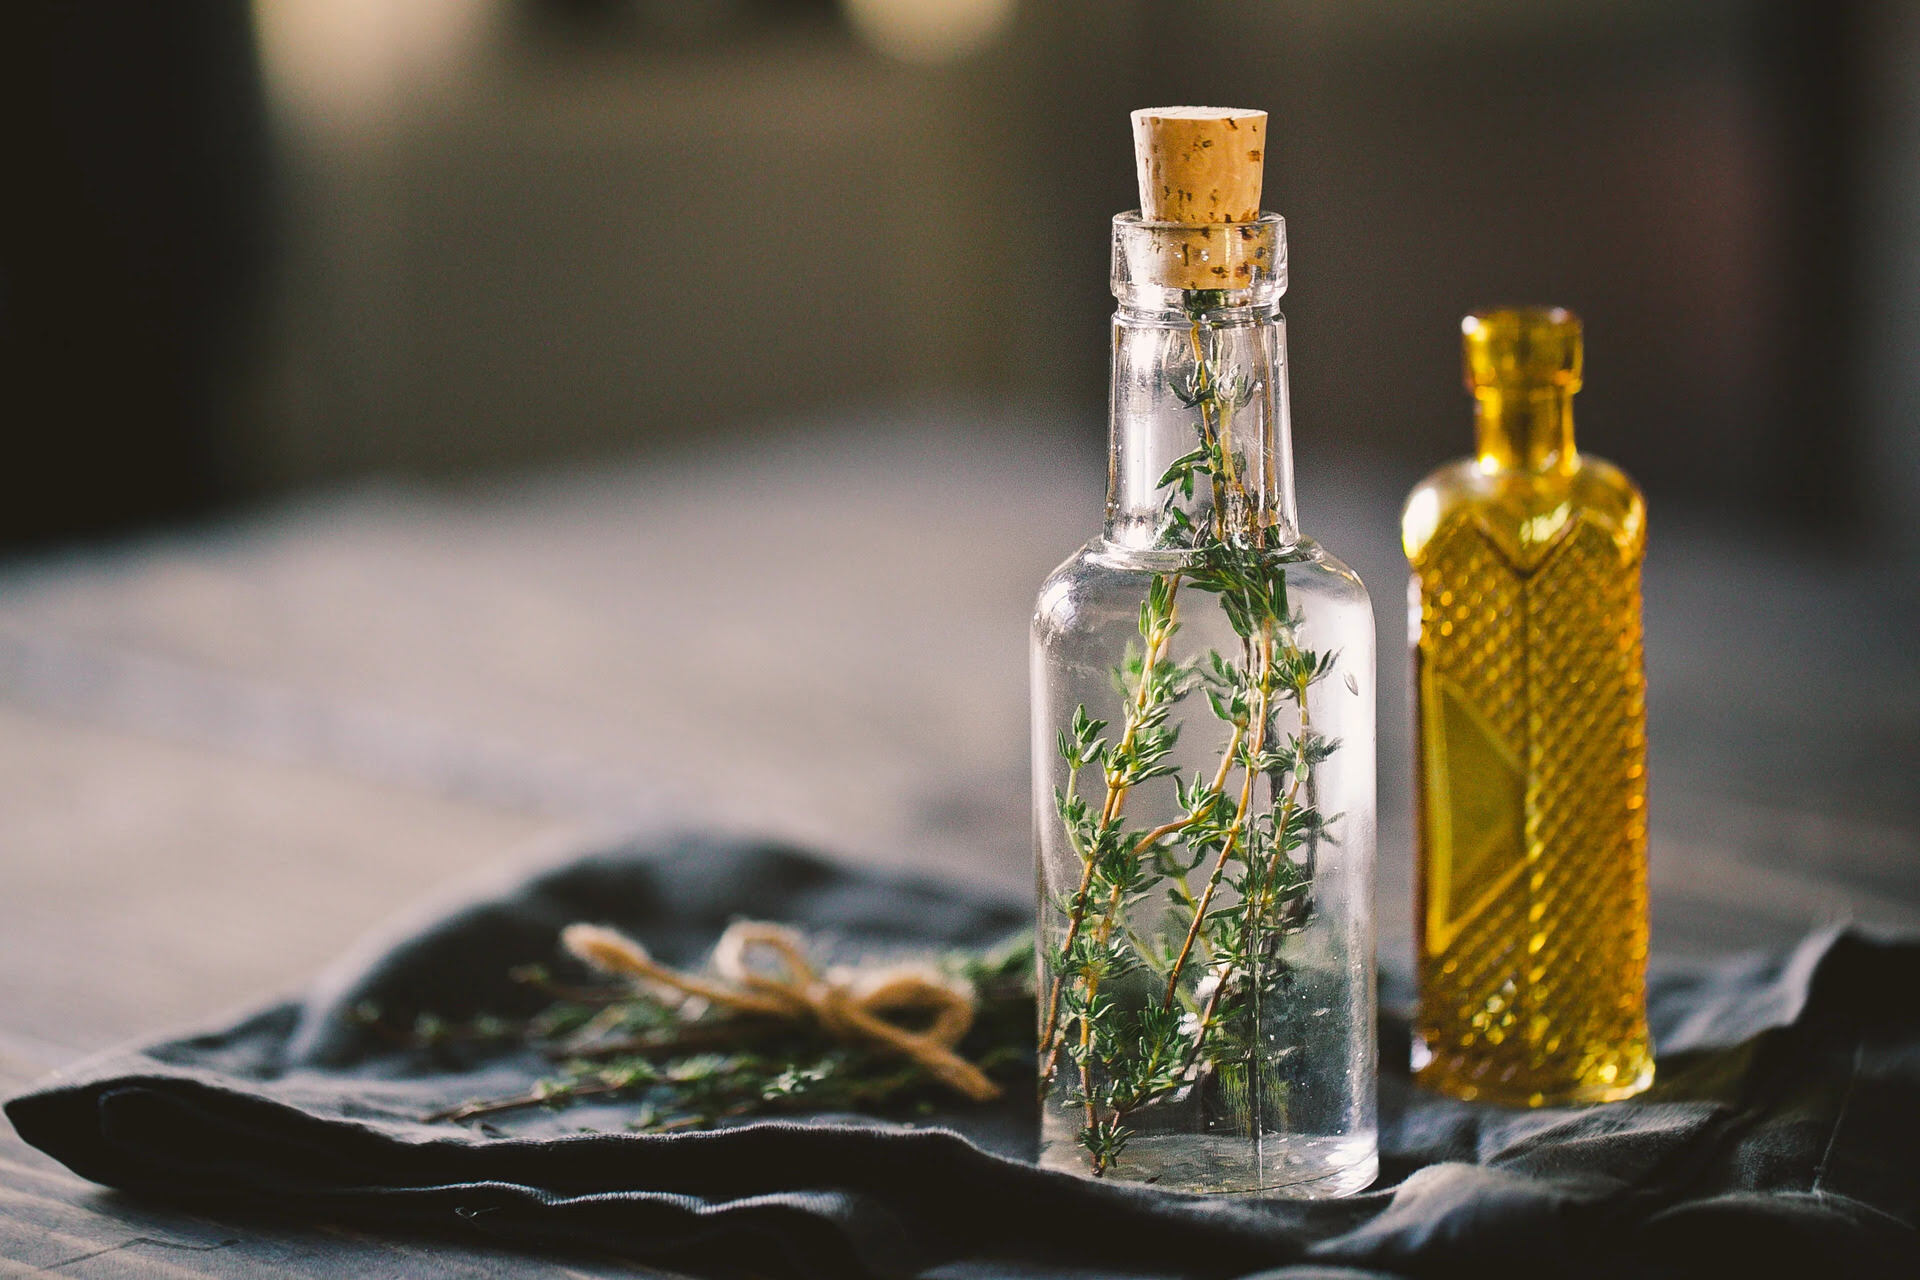 How To Make Thyme Tincture?